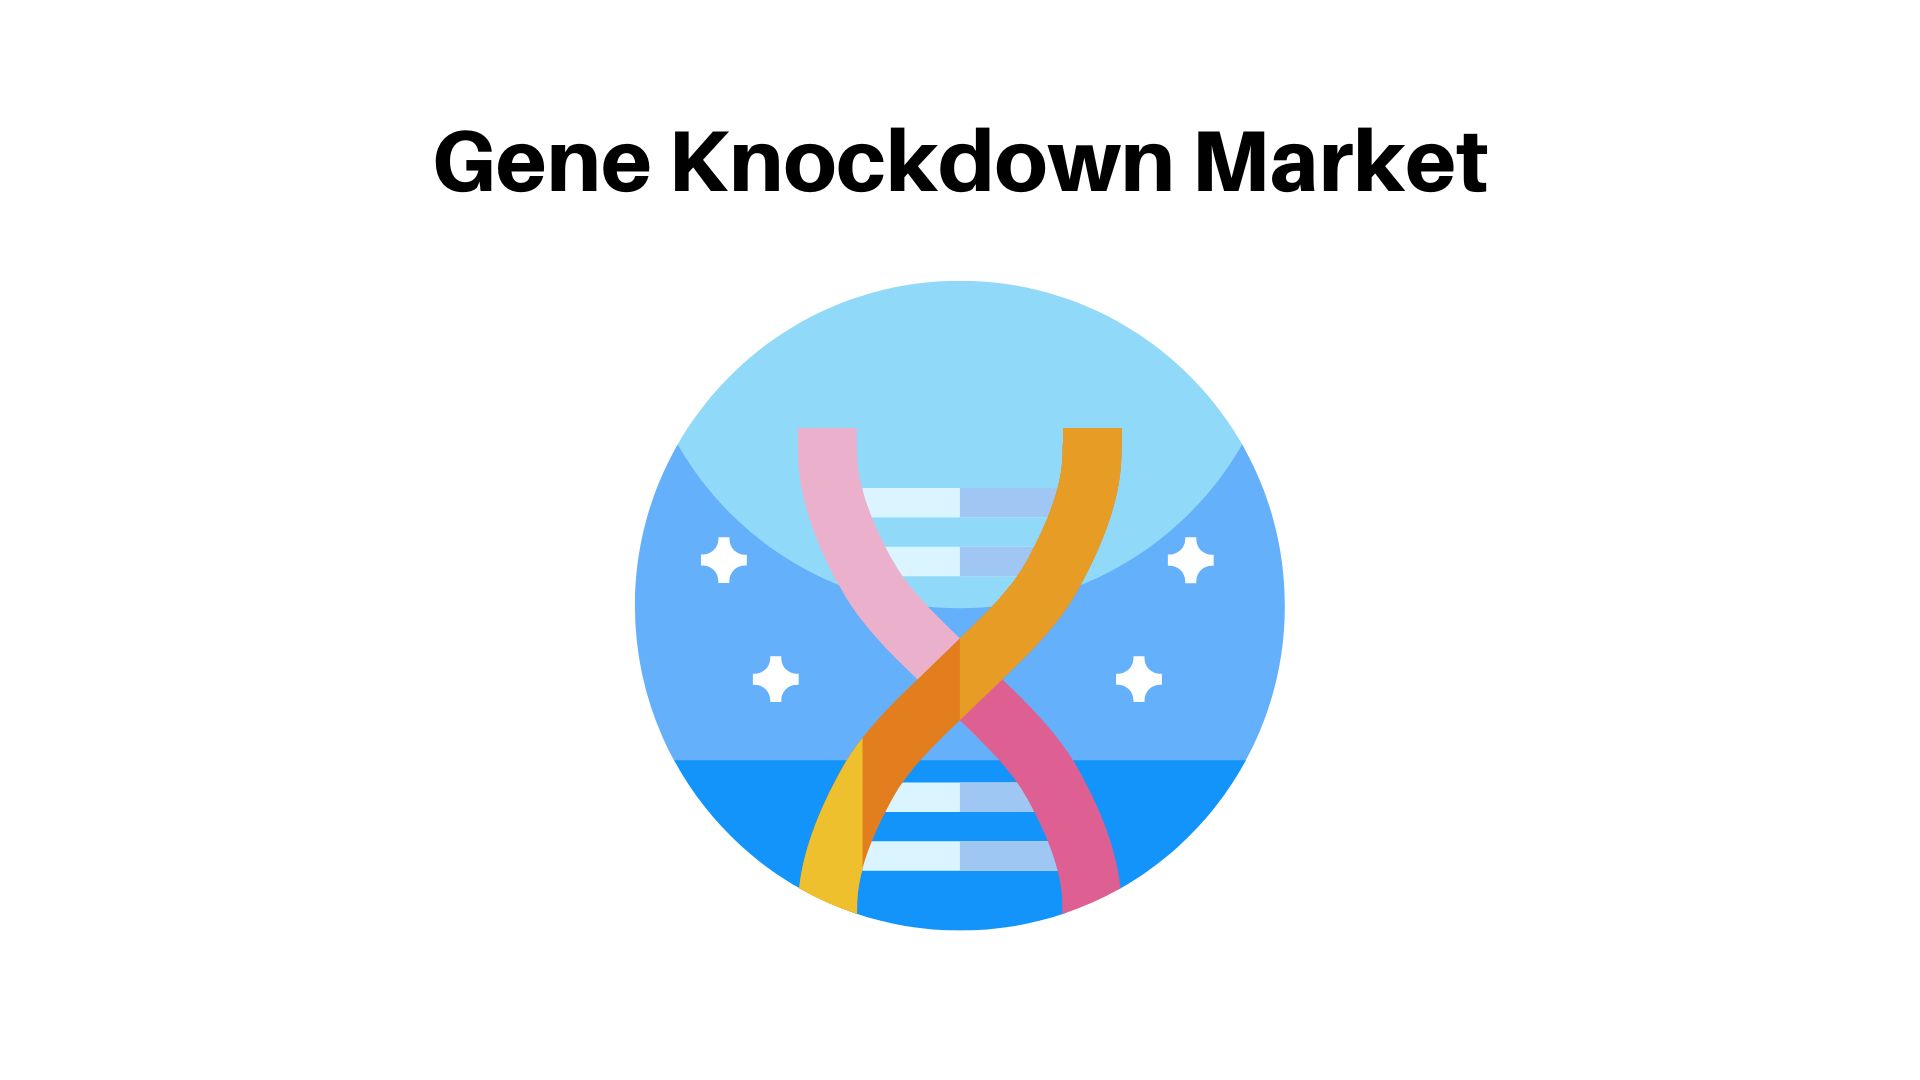 Gene Knockdown Market Report: Annual Growth 20.8% | A Road-map for Industry Success From 2022-2032